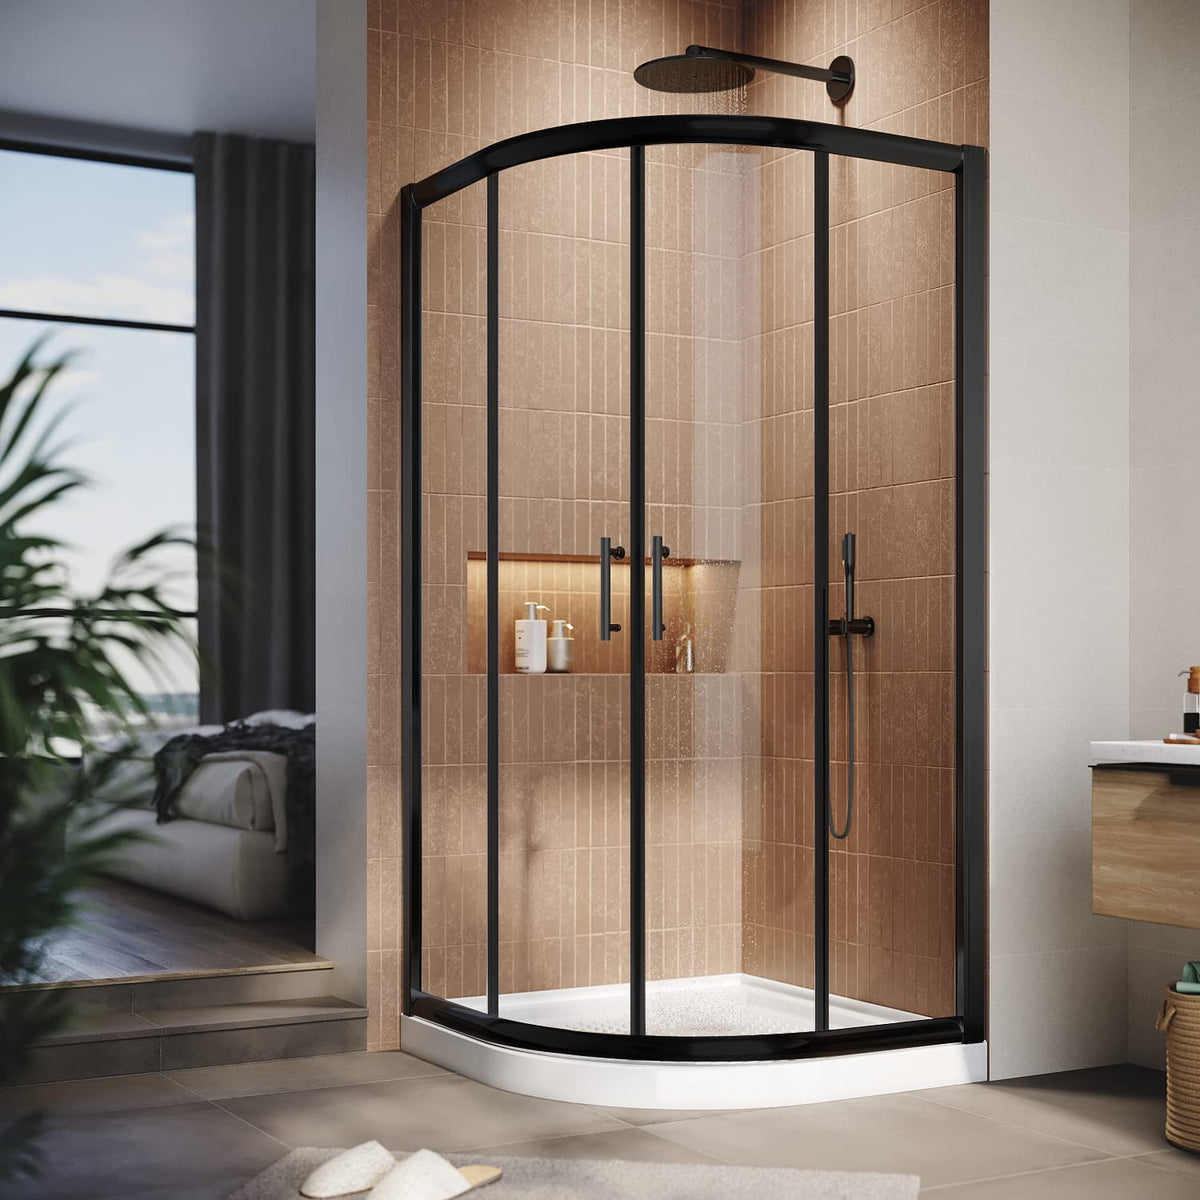 SUNNY SHOWER 38 in. D x 38 in. W x 72 in. H Black Finish Quadrant Enclosures With Sliding Doors - SUNNY SHOWER